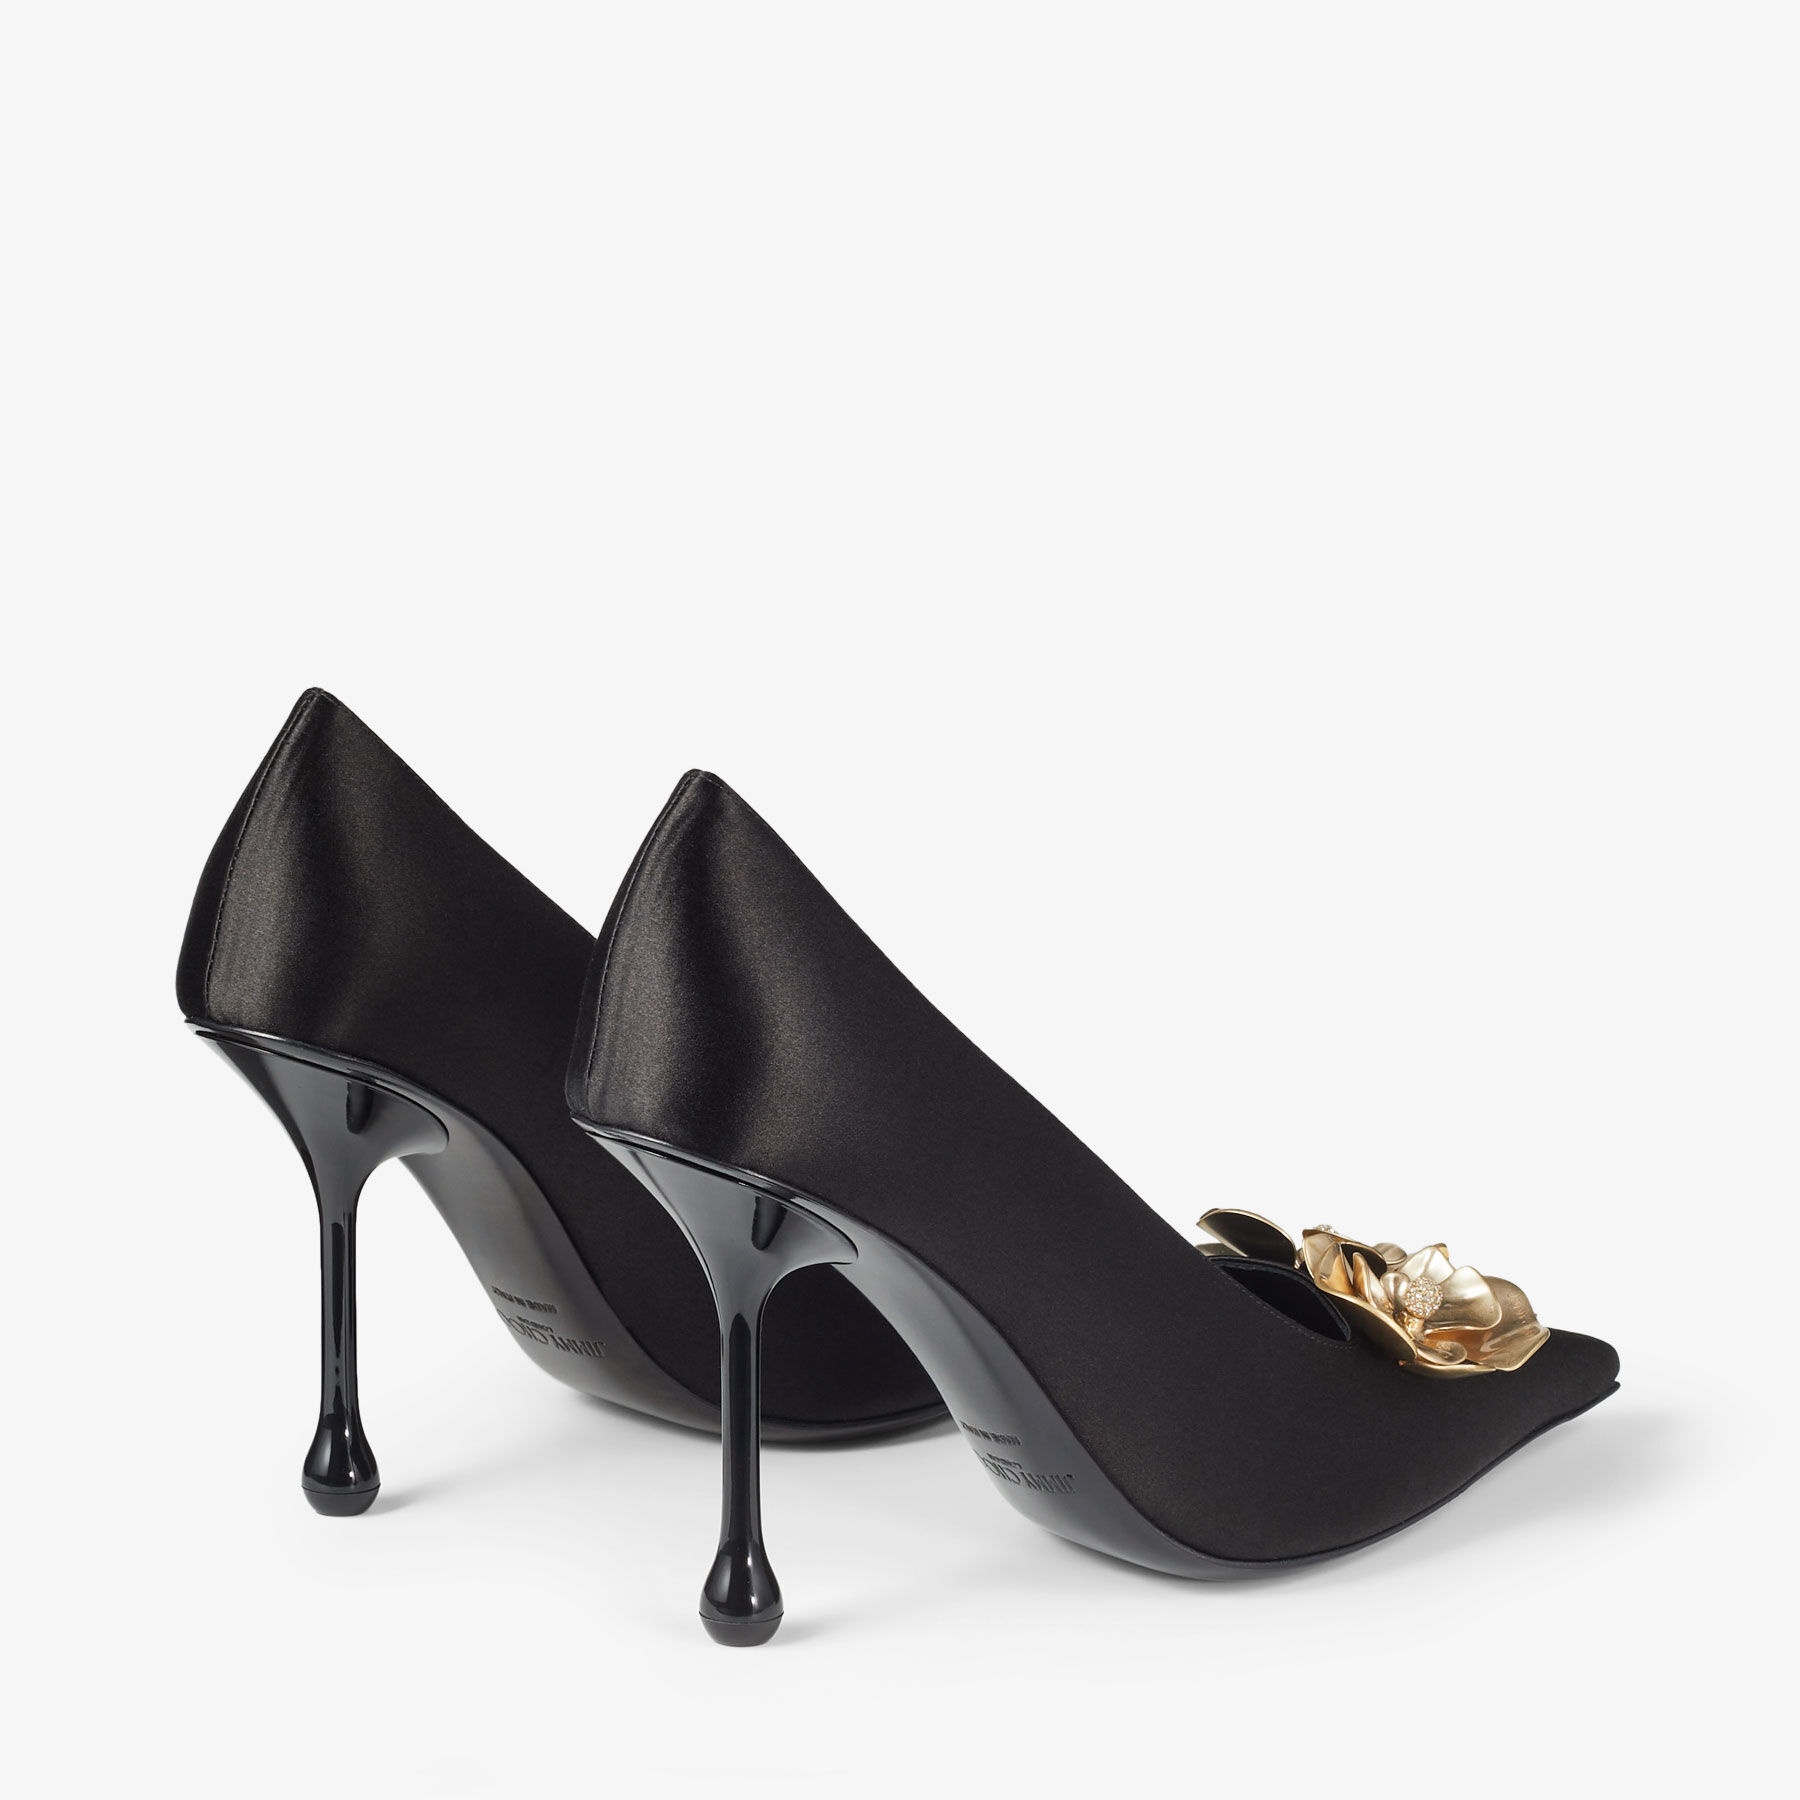 Ixia 95
Black Satin Pumps with Flowers - 7